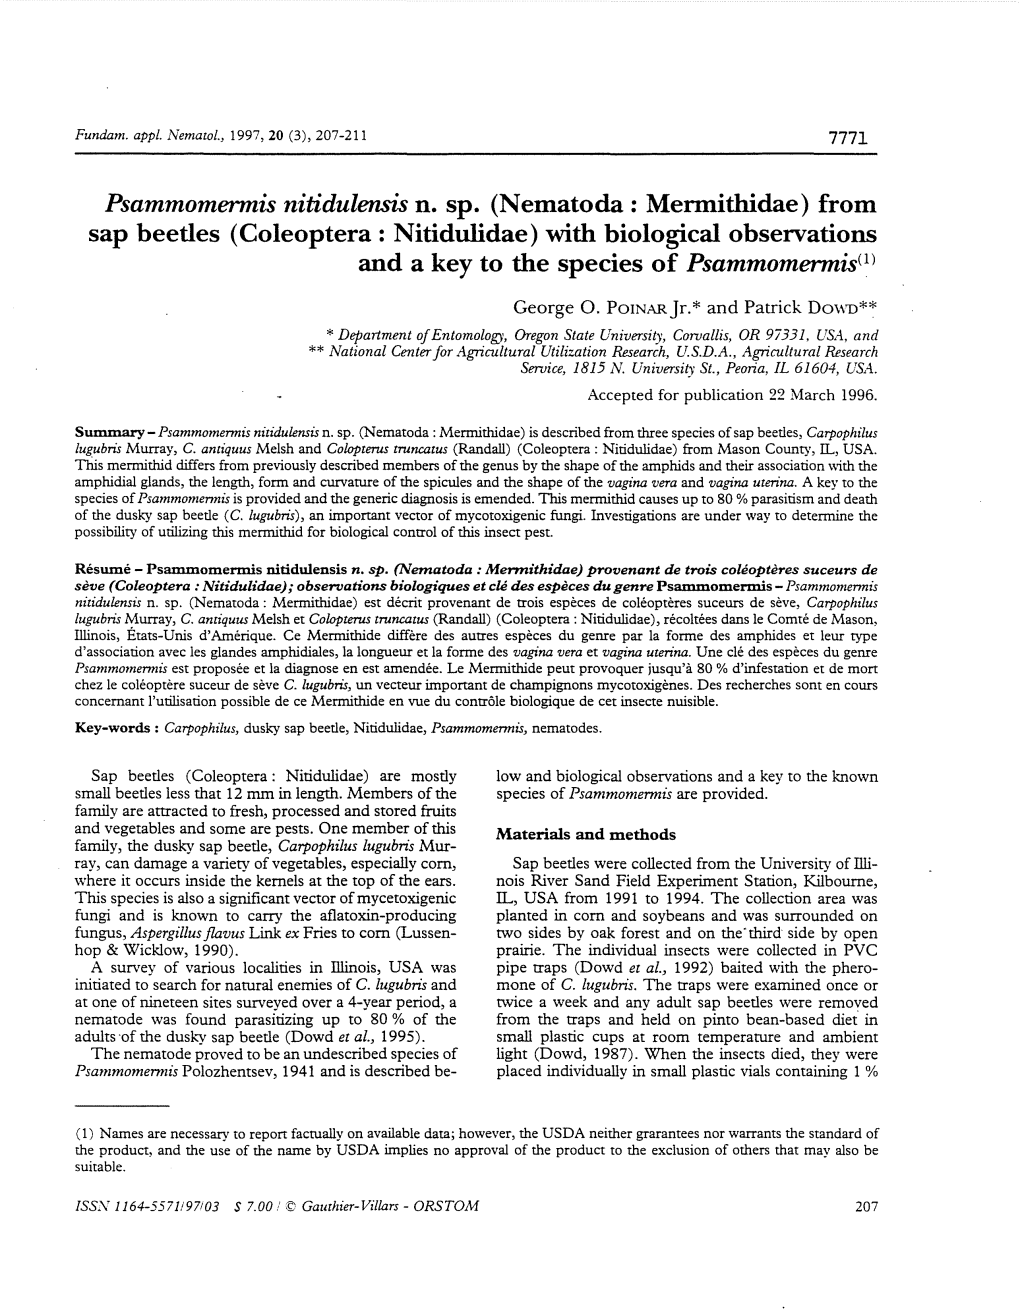 Nematoda: Mermithidae) from Sap Beetles (Coleoptera: Nitidulidae) with Biological Observations and a Key to the Species of Psammomermis(1